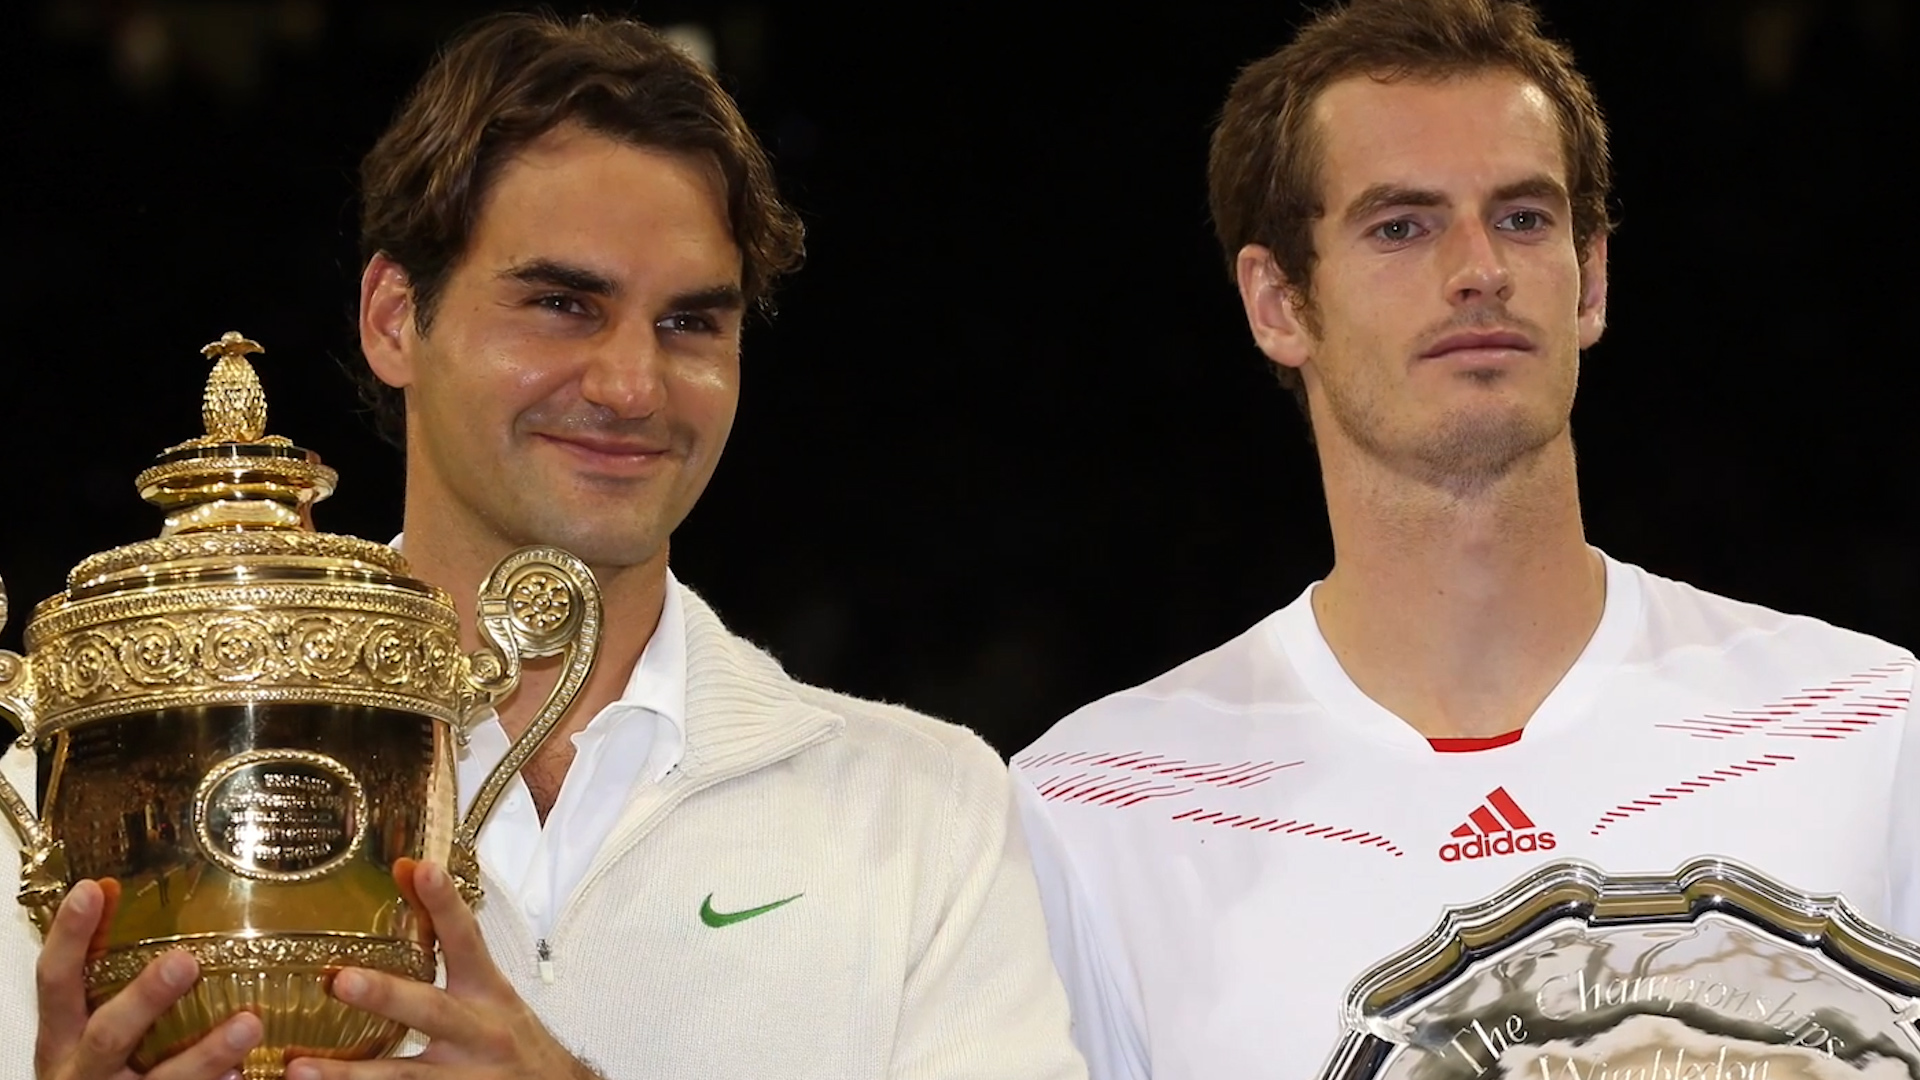 Andy Murray: "I was lucky to have the chance to play against Federer"